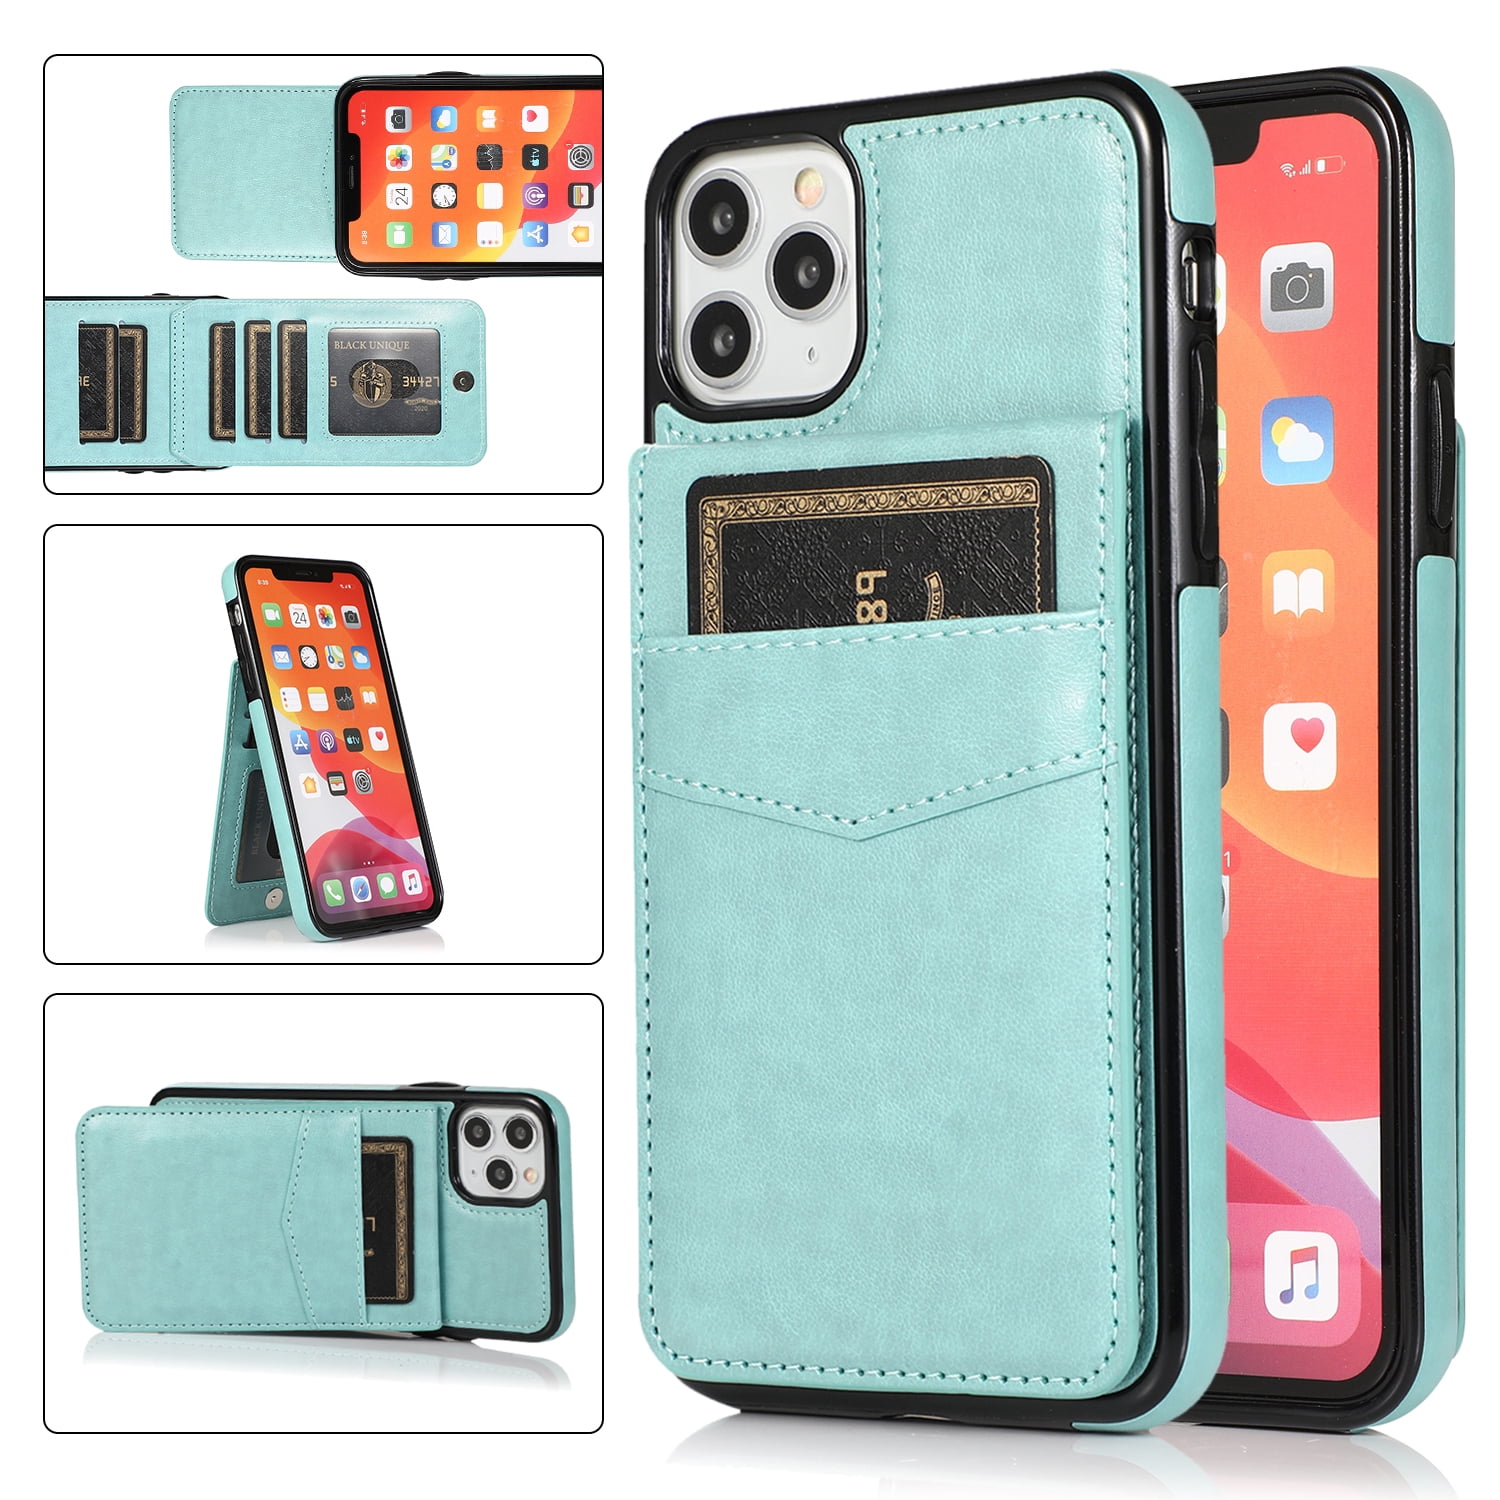 iPhone 11 Pro Flip Case Cover for Leather Cell Phone case Card Holders Kickstand Extra-Shockproof Business Flip Cover 